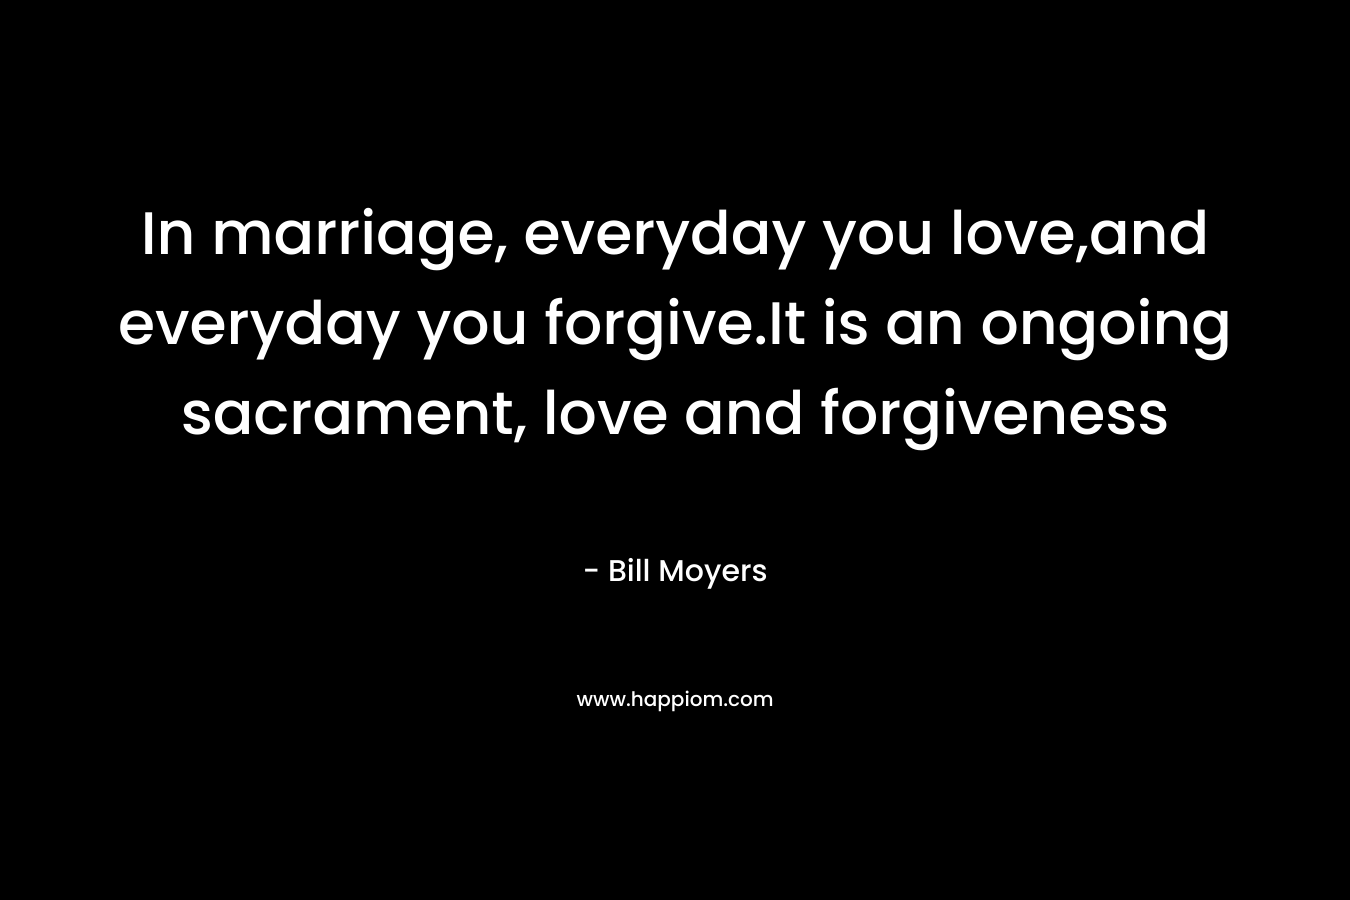 In marriage, everyday you love,and everyday you forgive.It is an ongoing sacrament, love and forgiveness – Bill Moyers